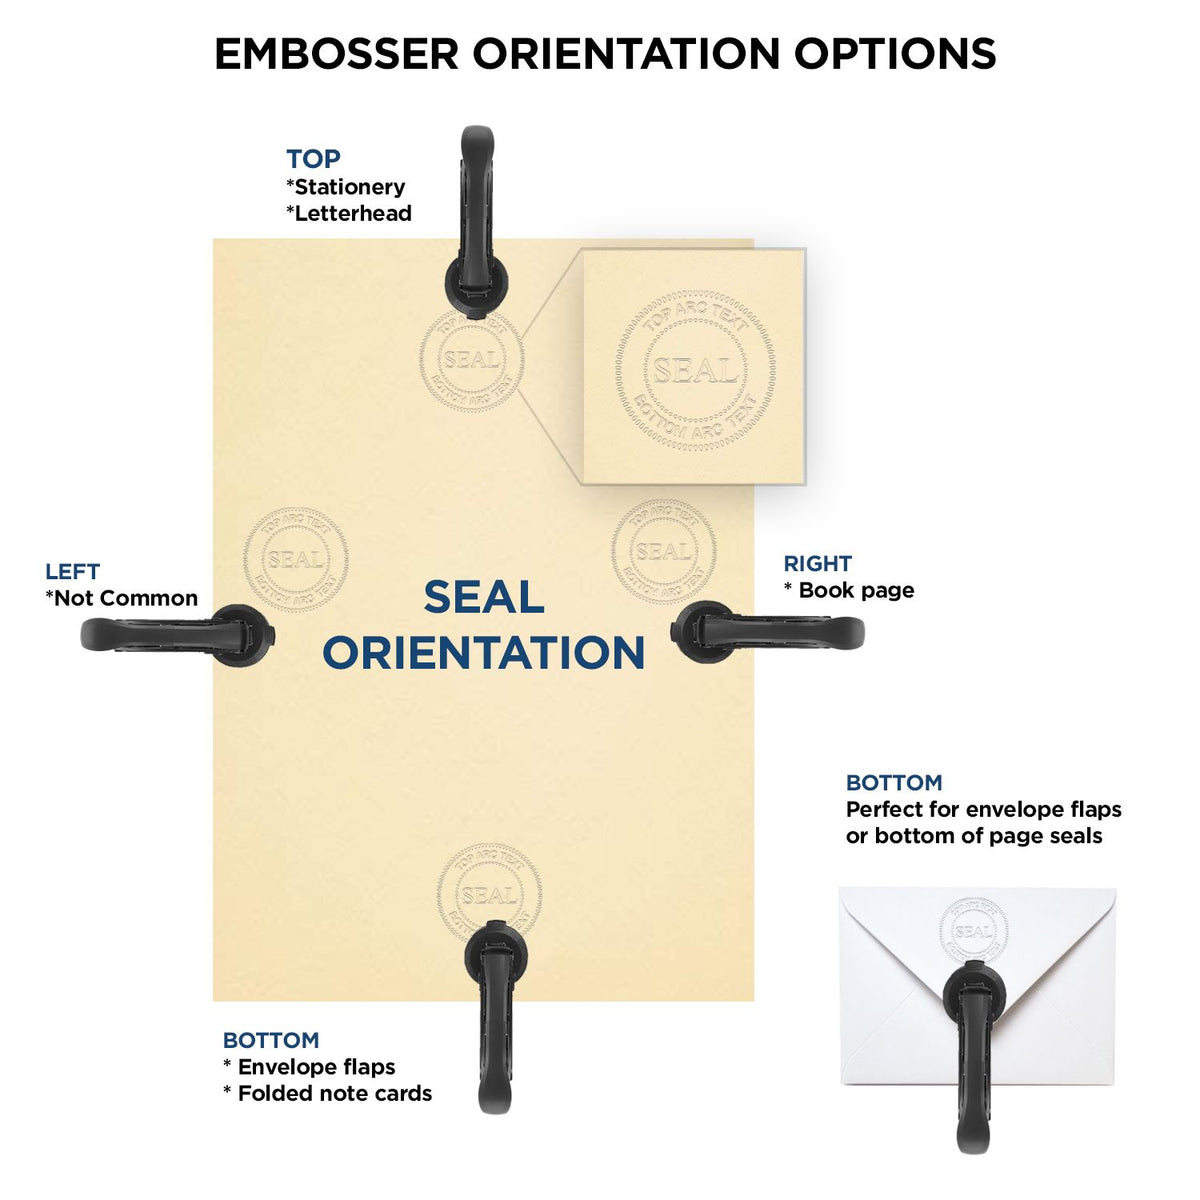 An infographic for the Handheld Iowa Land Surveyor Seal showing embosser orientation, this is showing examples of a top, bottom, right and left insert.